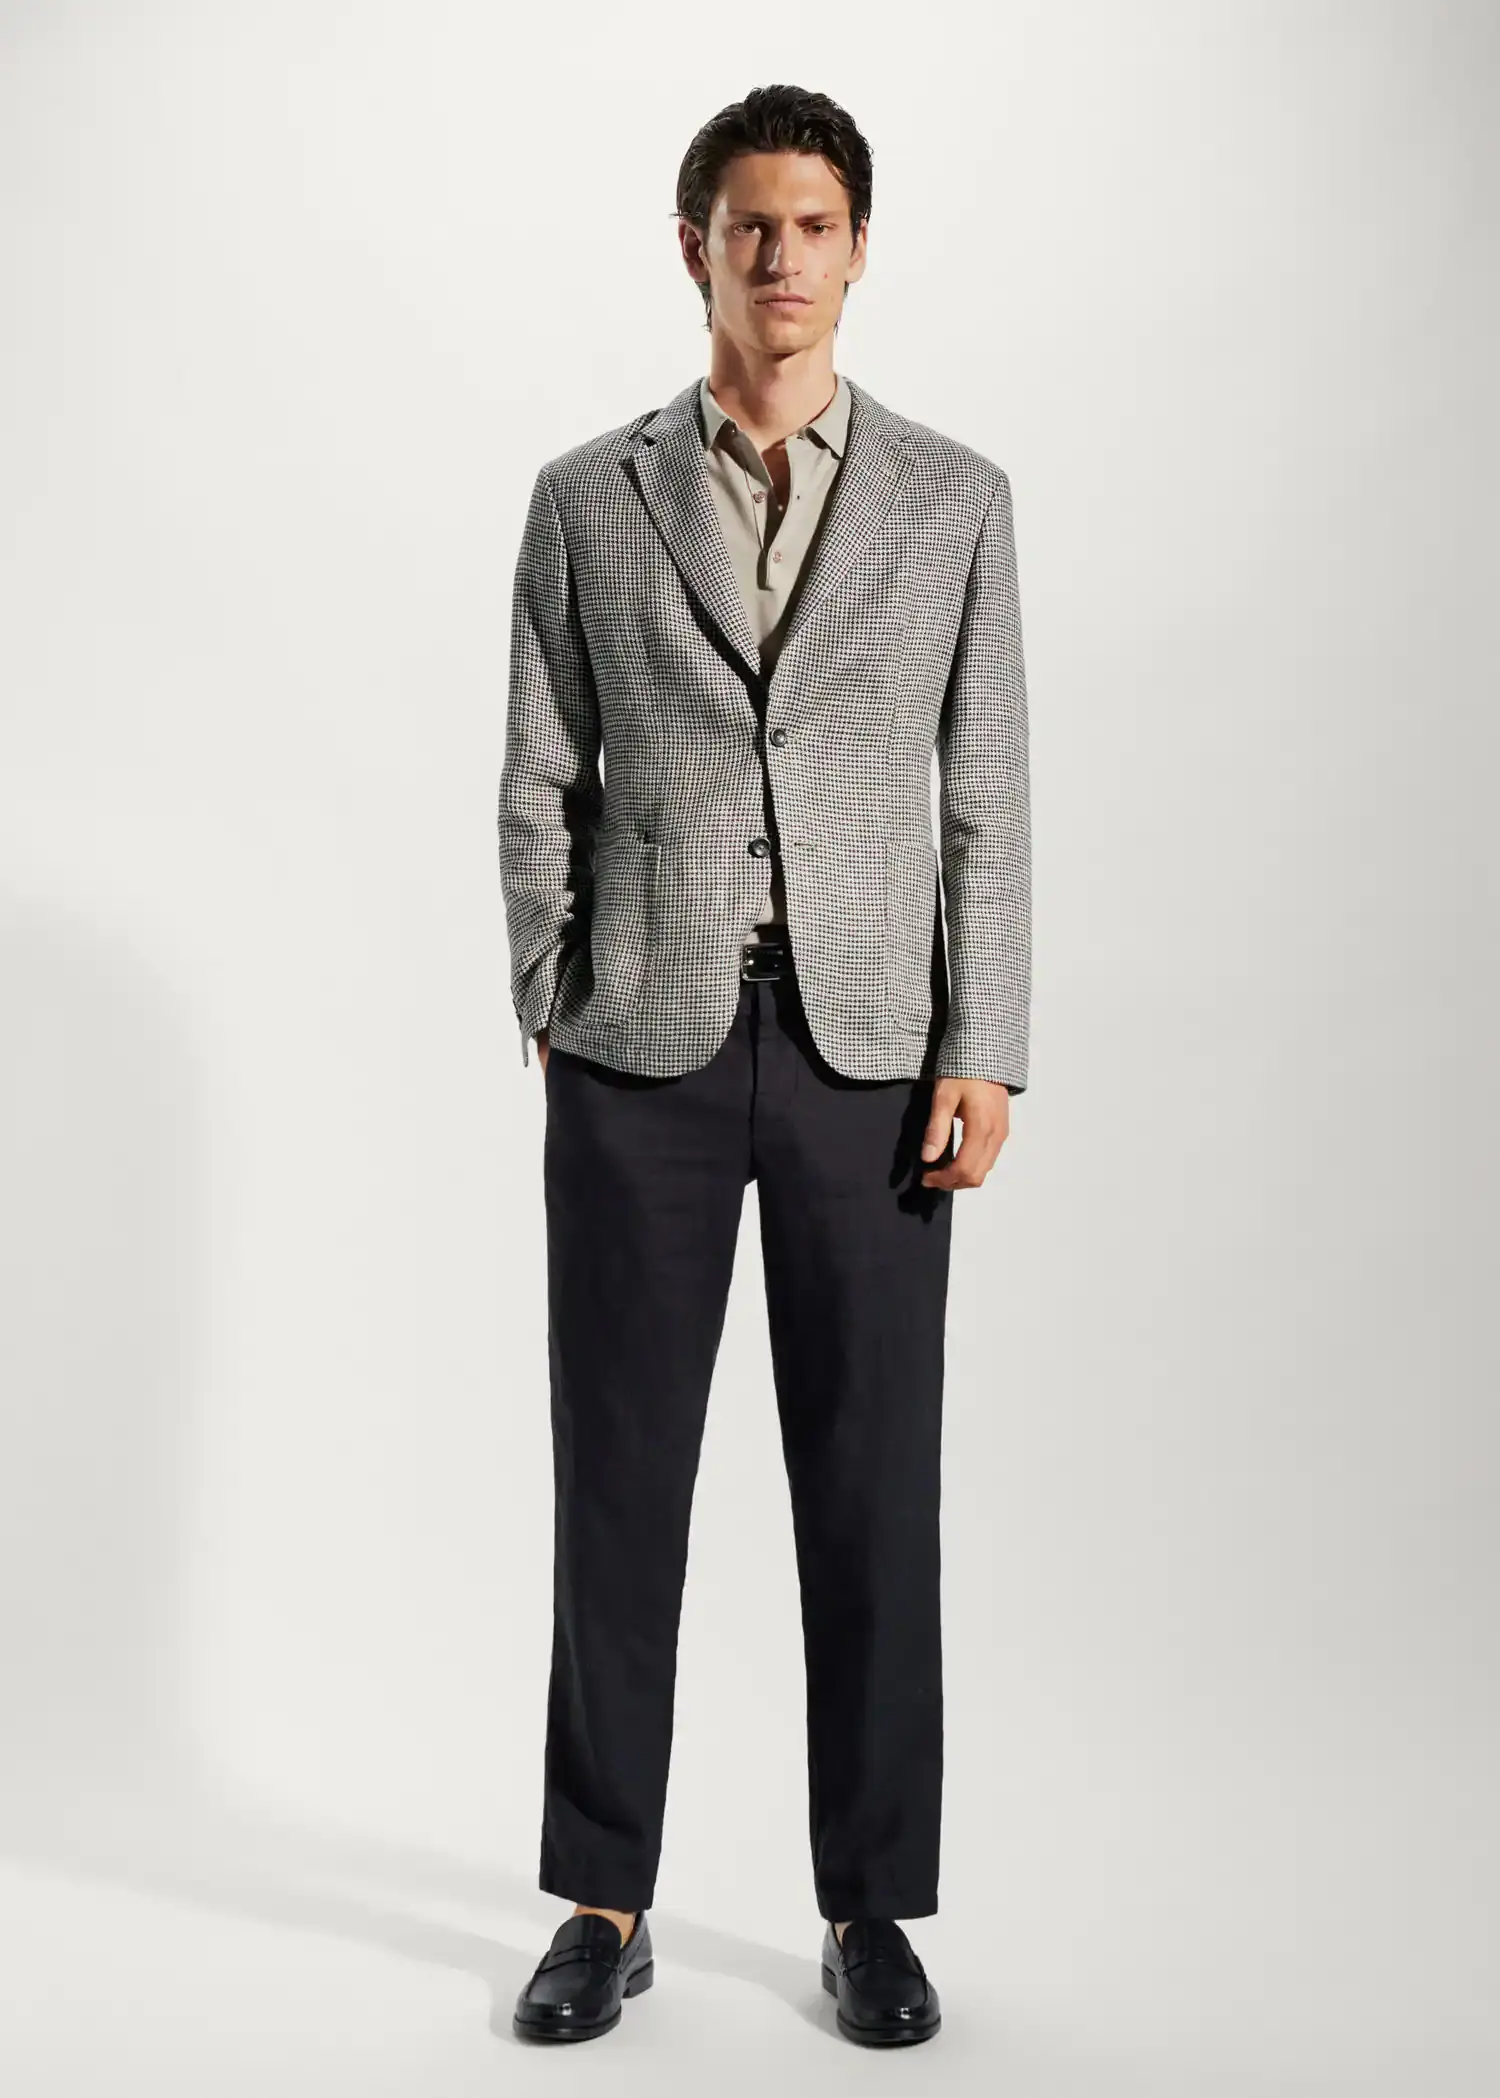 Mango 100% linen micro-houndstooth jacket. a man wearing a suit and tie standing in front of a white wall. 